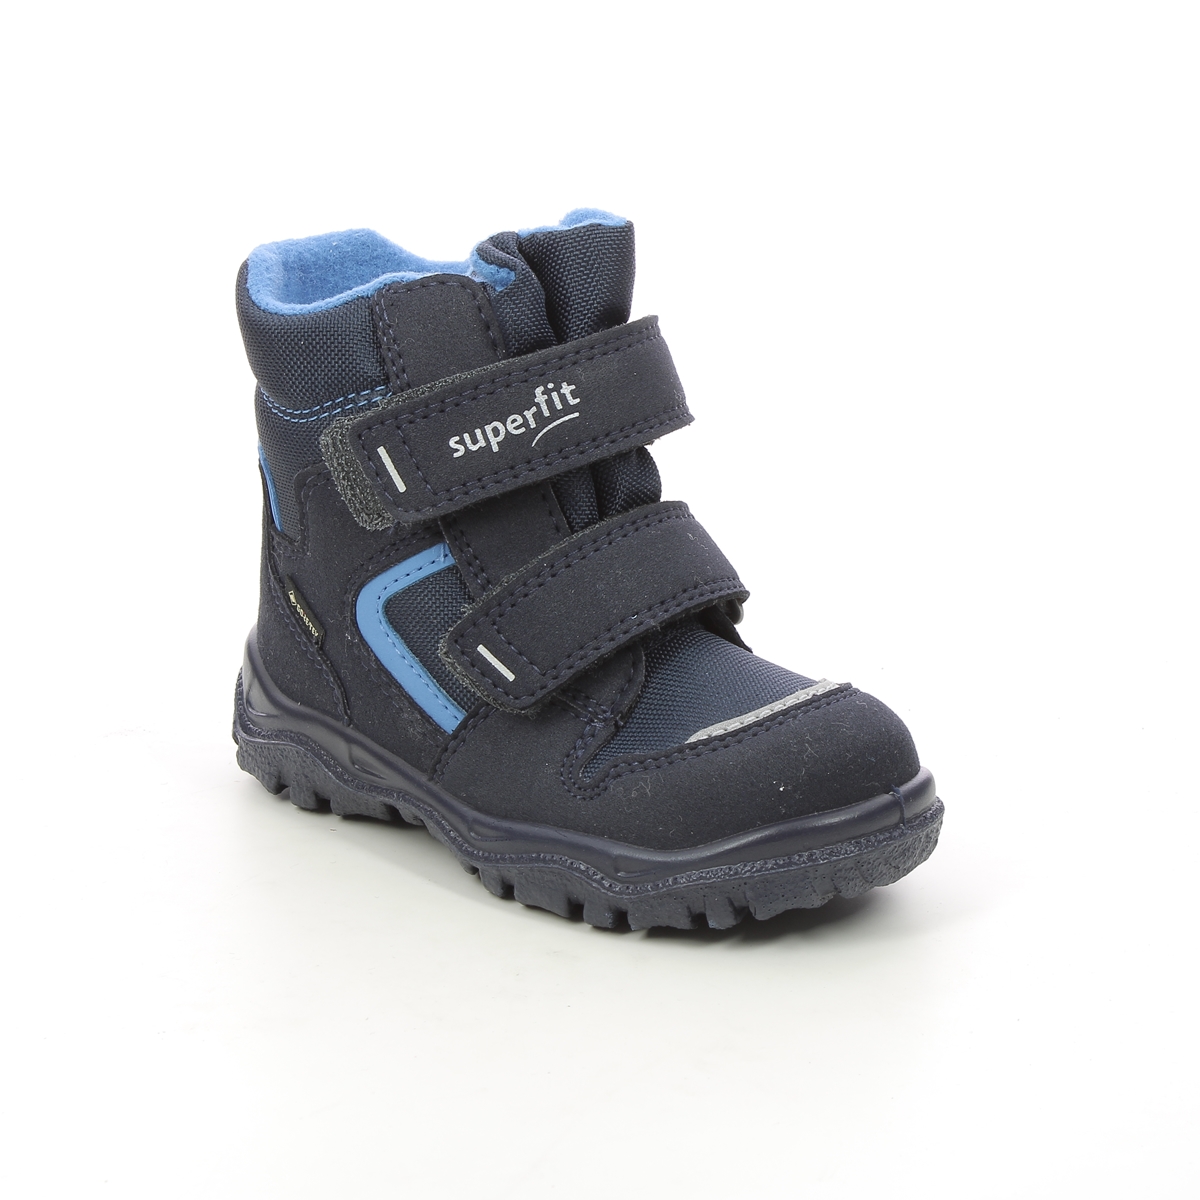 Superfit Husky Inf Gtx Navy Kids Toddler Boys Boots 1000047-8000 In Size 21 In Plain Navy